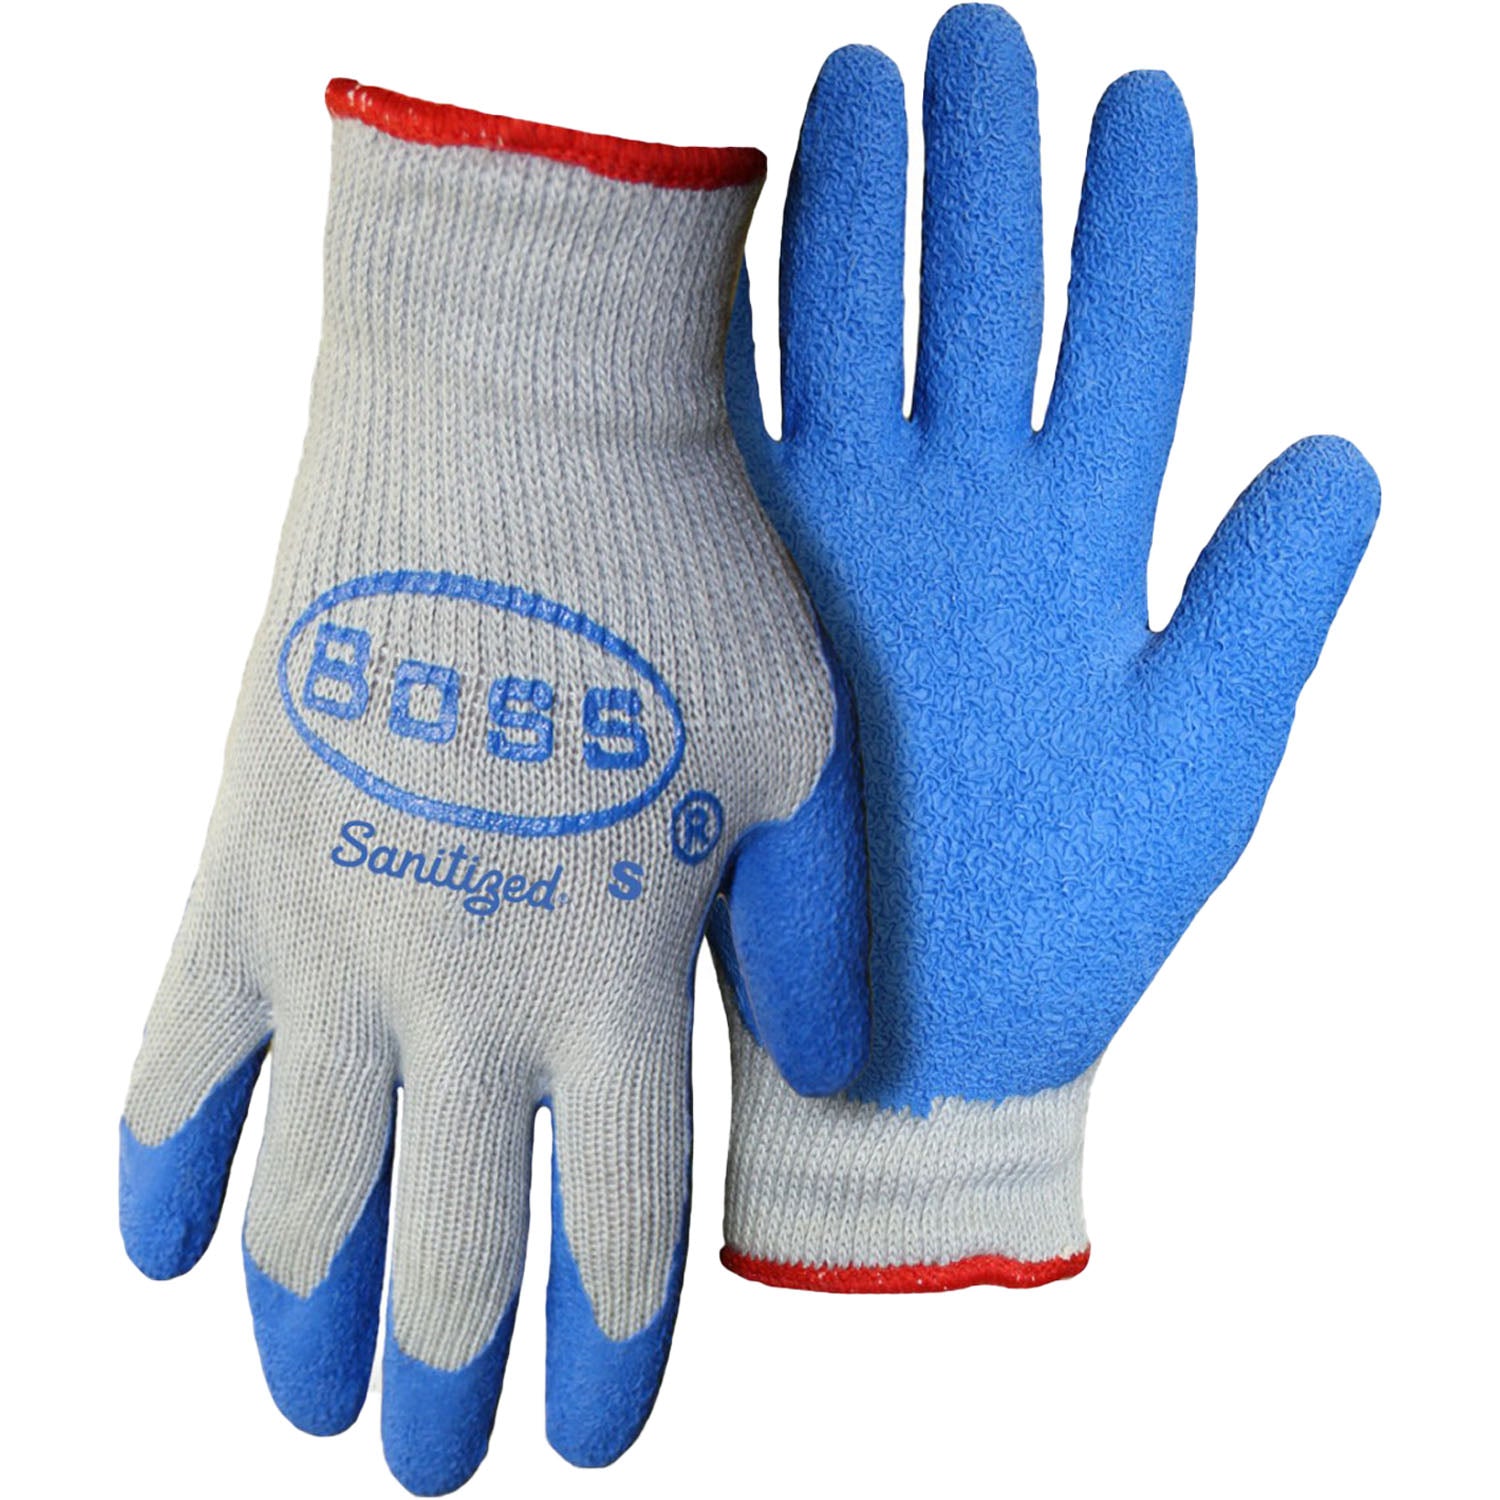 Boss Grip 8422 Rubber Palm Coated String Knit Work Gloves Large (1 Pair)